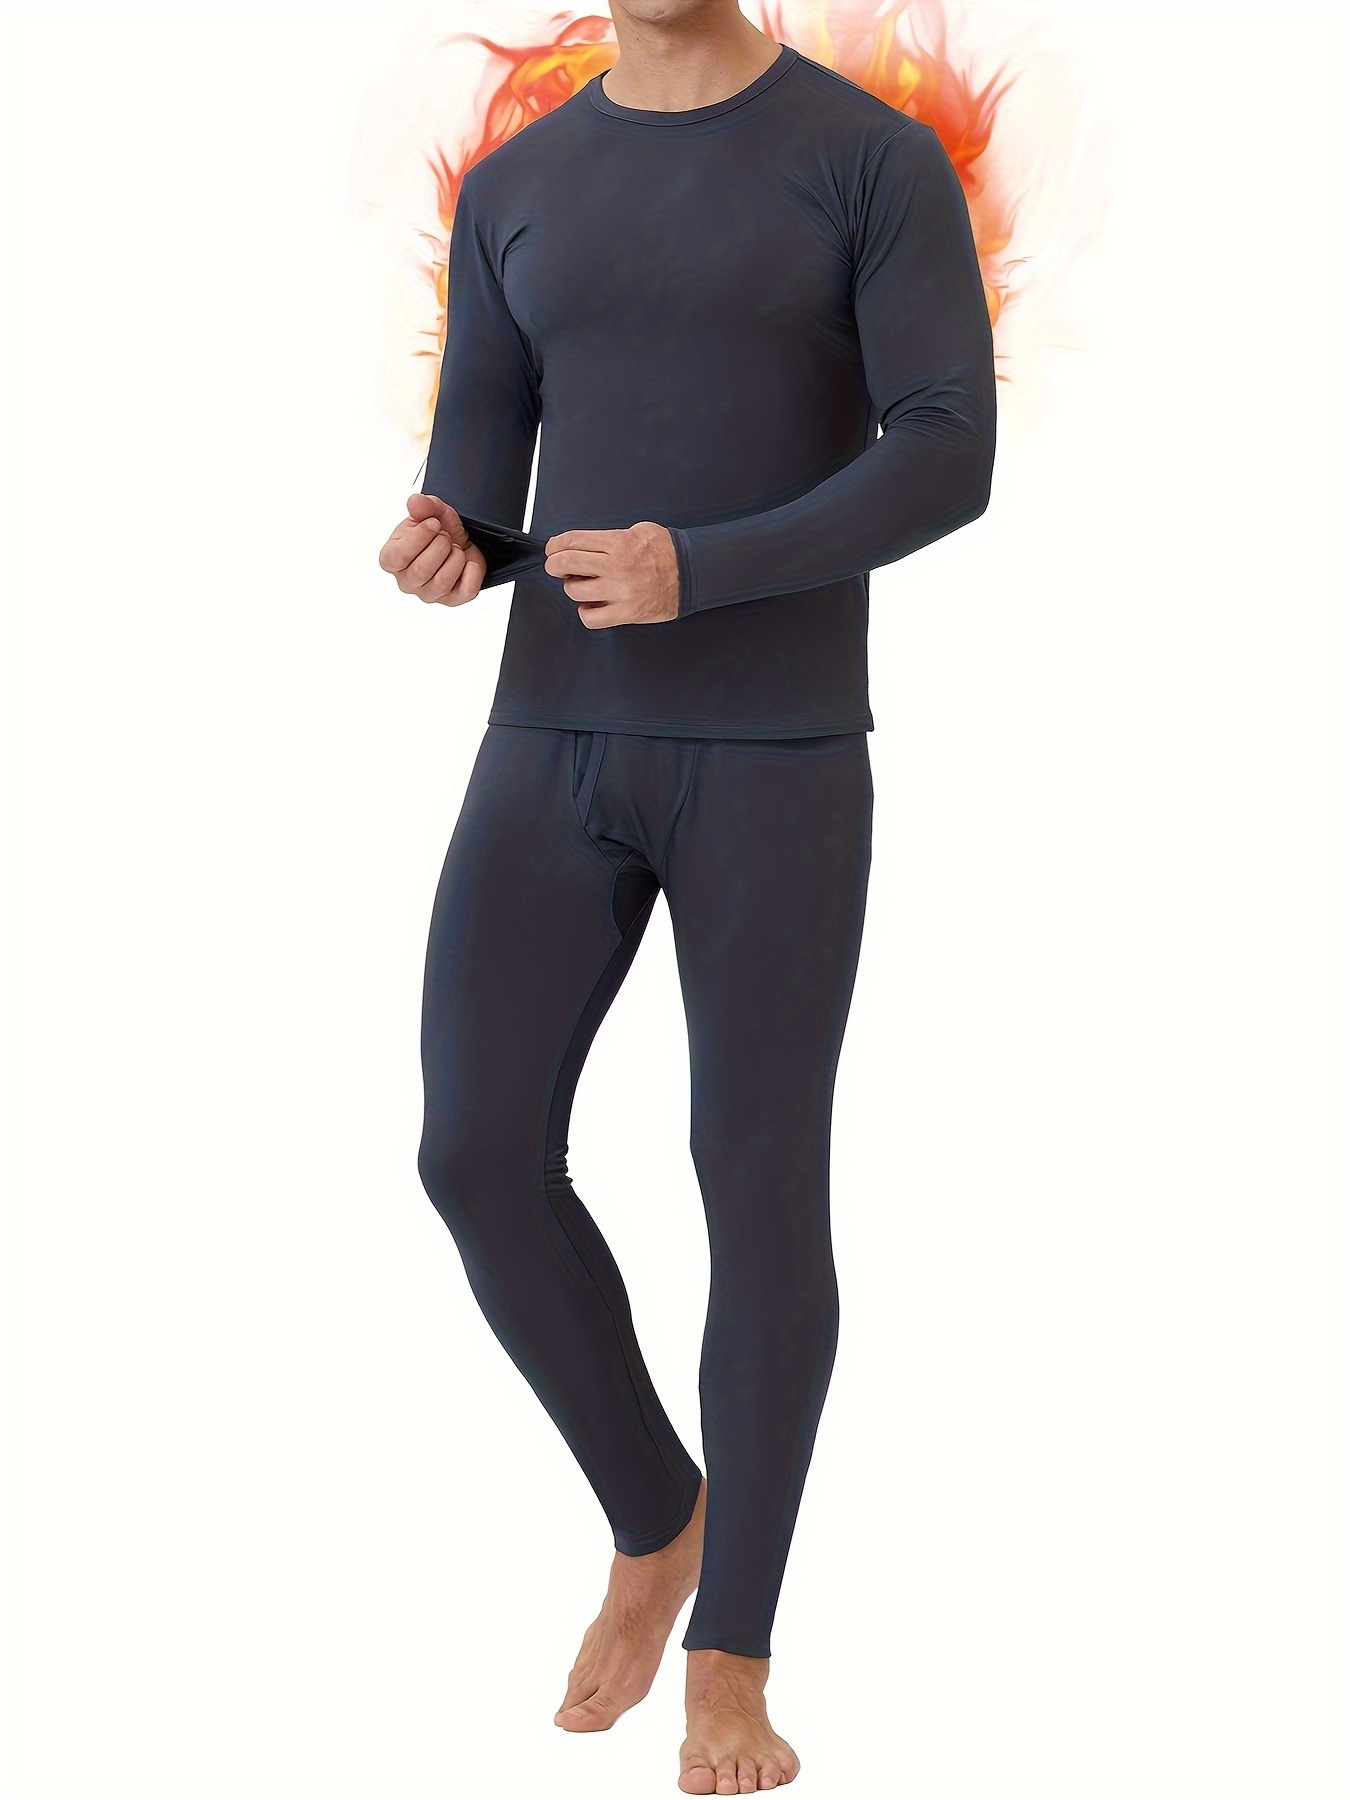 Thermajohn Long Johns Thermal Underwear for Men and Women Fleece